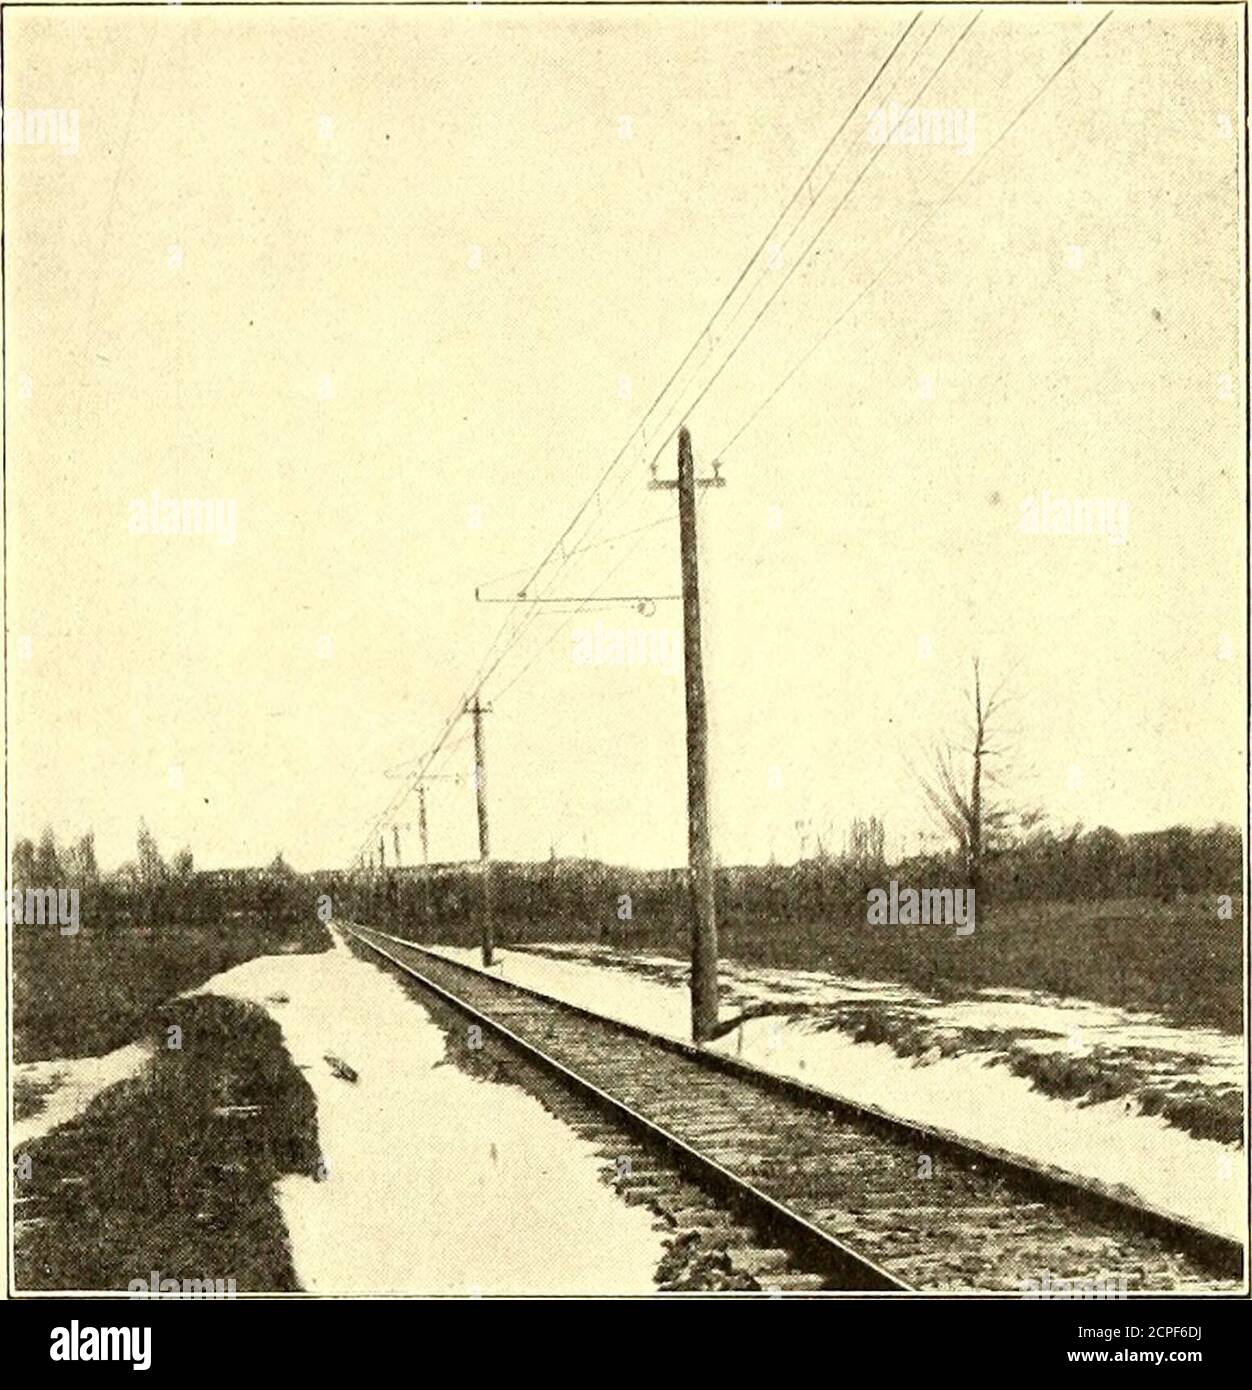 . The Street railway journal . or a pressure of 6600 volts.The trolley is No. 000 grooved wire, and is suspended froma 7/16-in. seven-strand galvanized steel messenger cable bymeans of galvanized-iron trolley hangers, spaced approxi-mately 10 ft. apart. These hangers consist of short lengthsof pipe threaded at one end and flattened and punched atthe other. The threaded end engages in a socket which fitsover the threaded portion of two drop-forged steel lugs,which engage in the groove of the trolley wire. Thepunched end of the hanger is secured to the messenger cableby means of a strap-iron cla Stock Photo